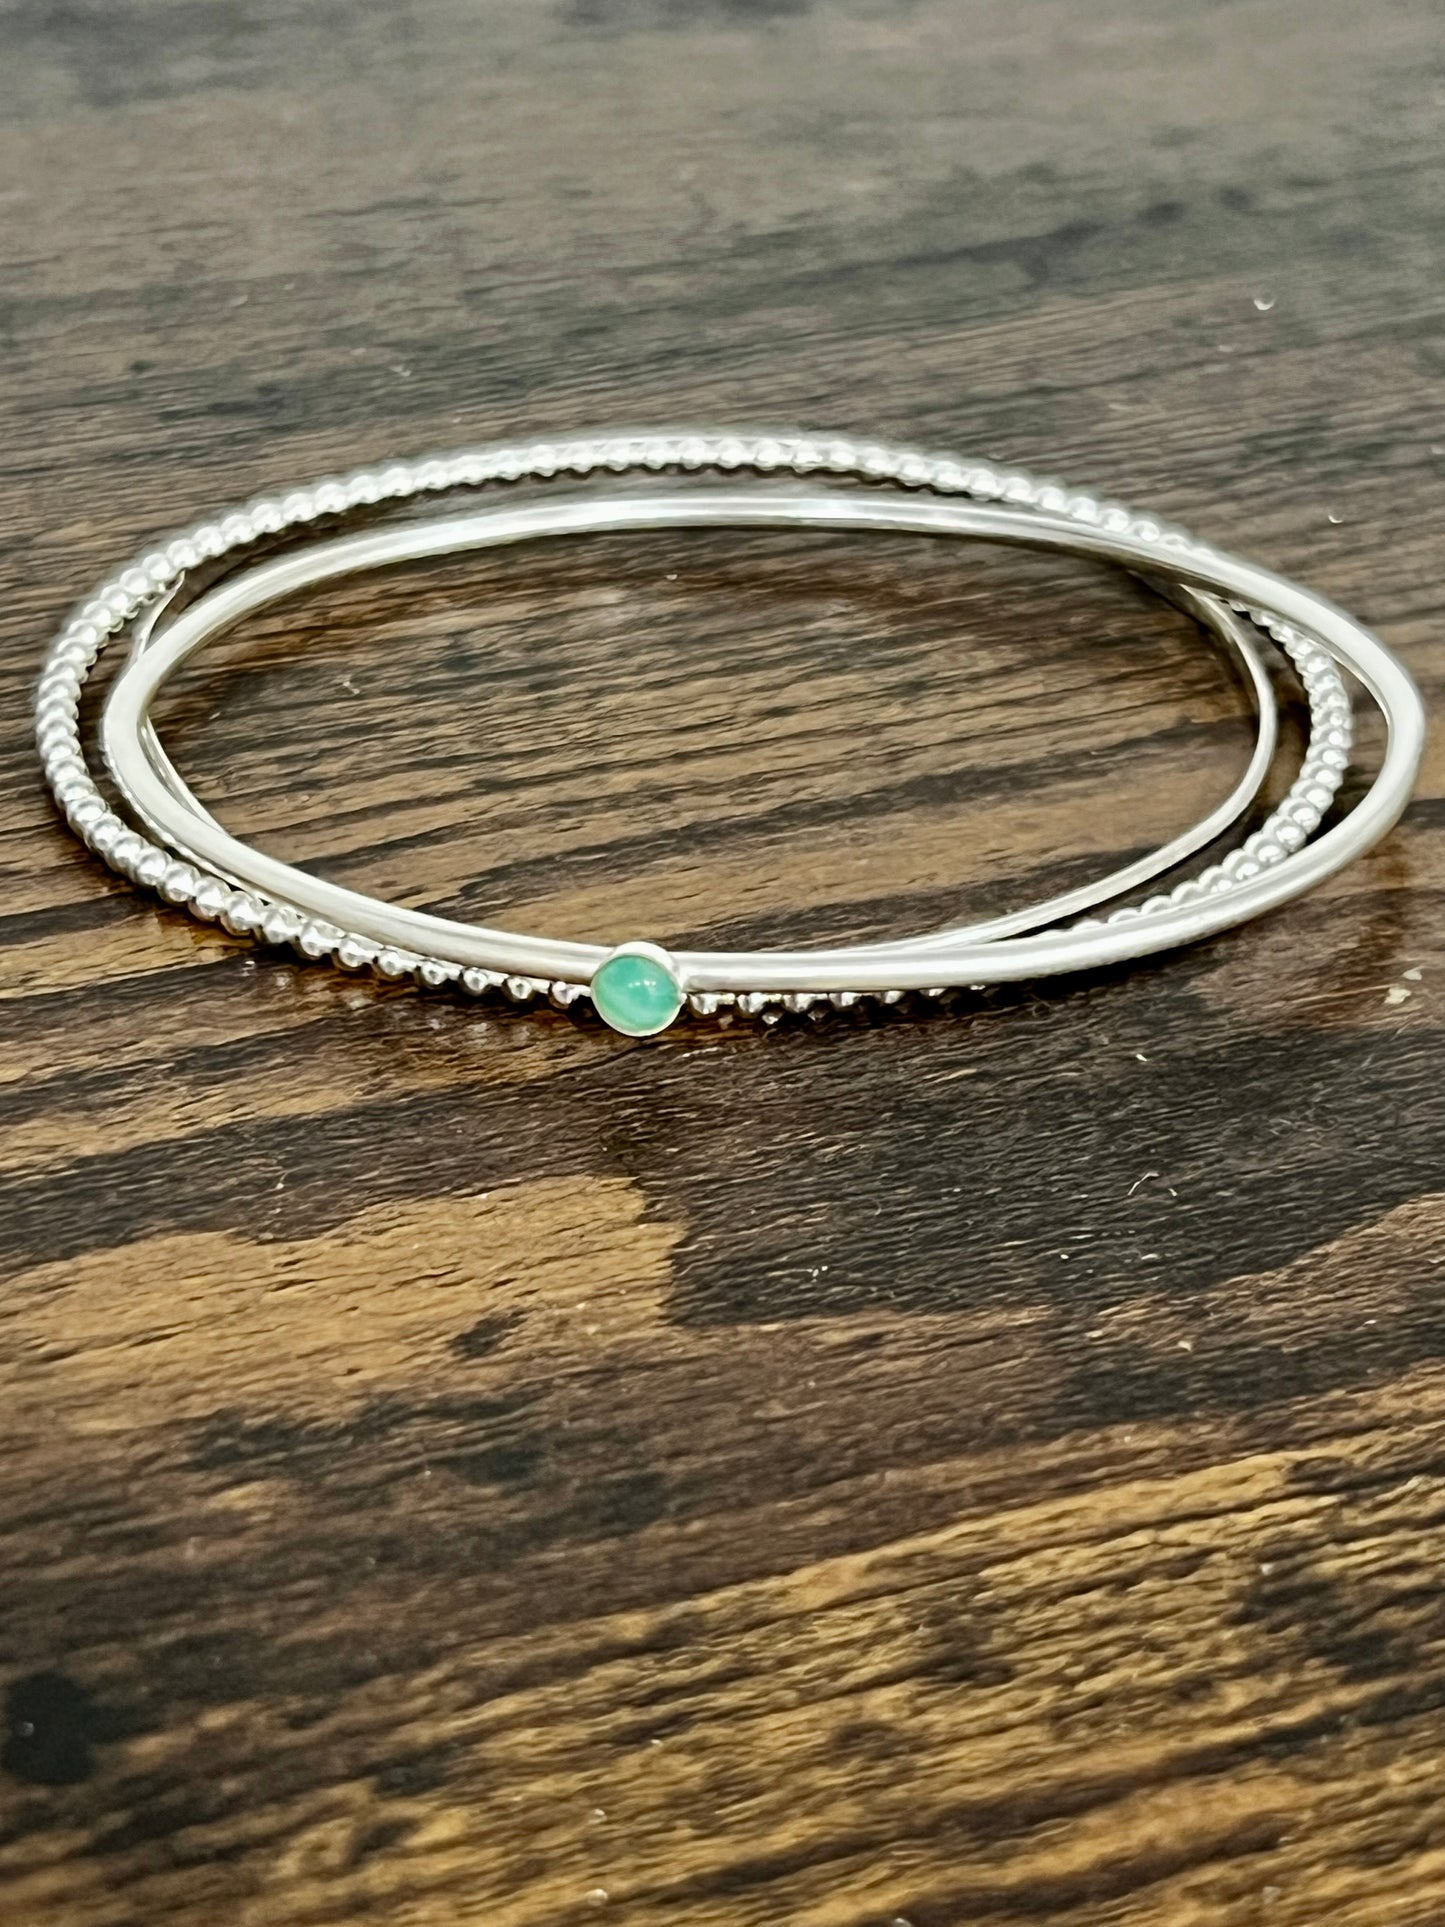 Stacker Session March 16th - Make 3 Stacker Rings or 3 Bangle Bracelets